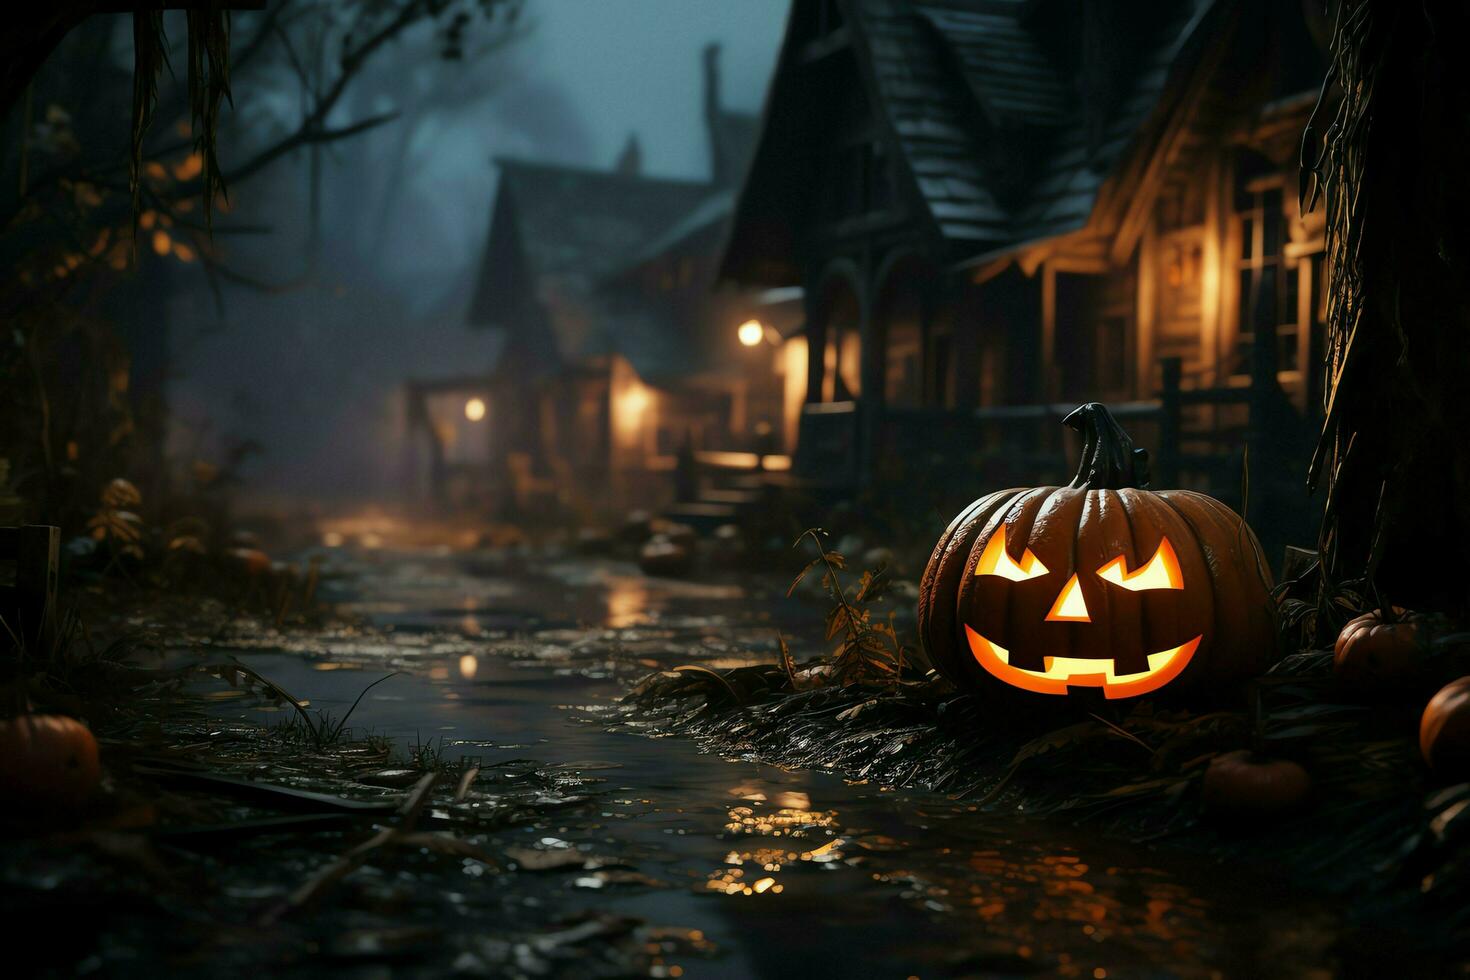 Scary pumpkin and house in night of full moon on halloween celebration concept. Spooky halloween background with pumpkin. Dirty house and pumpkin on halloween celebration concept by AI generated photo